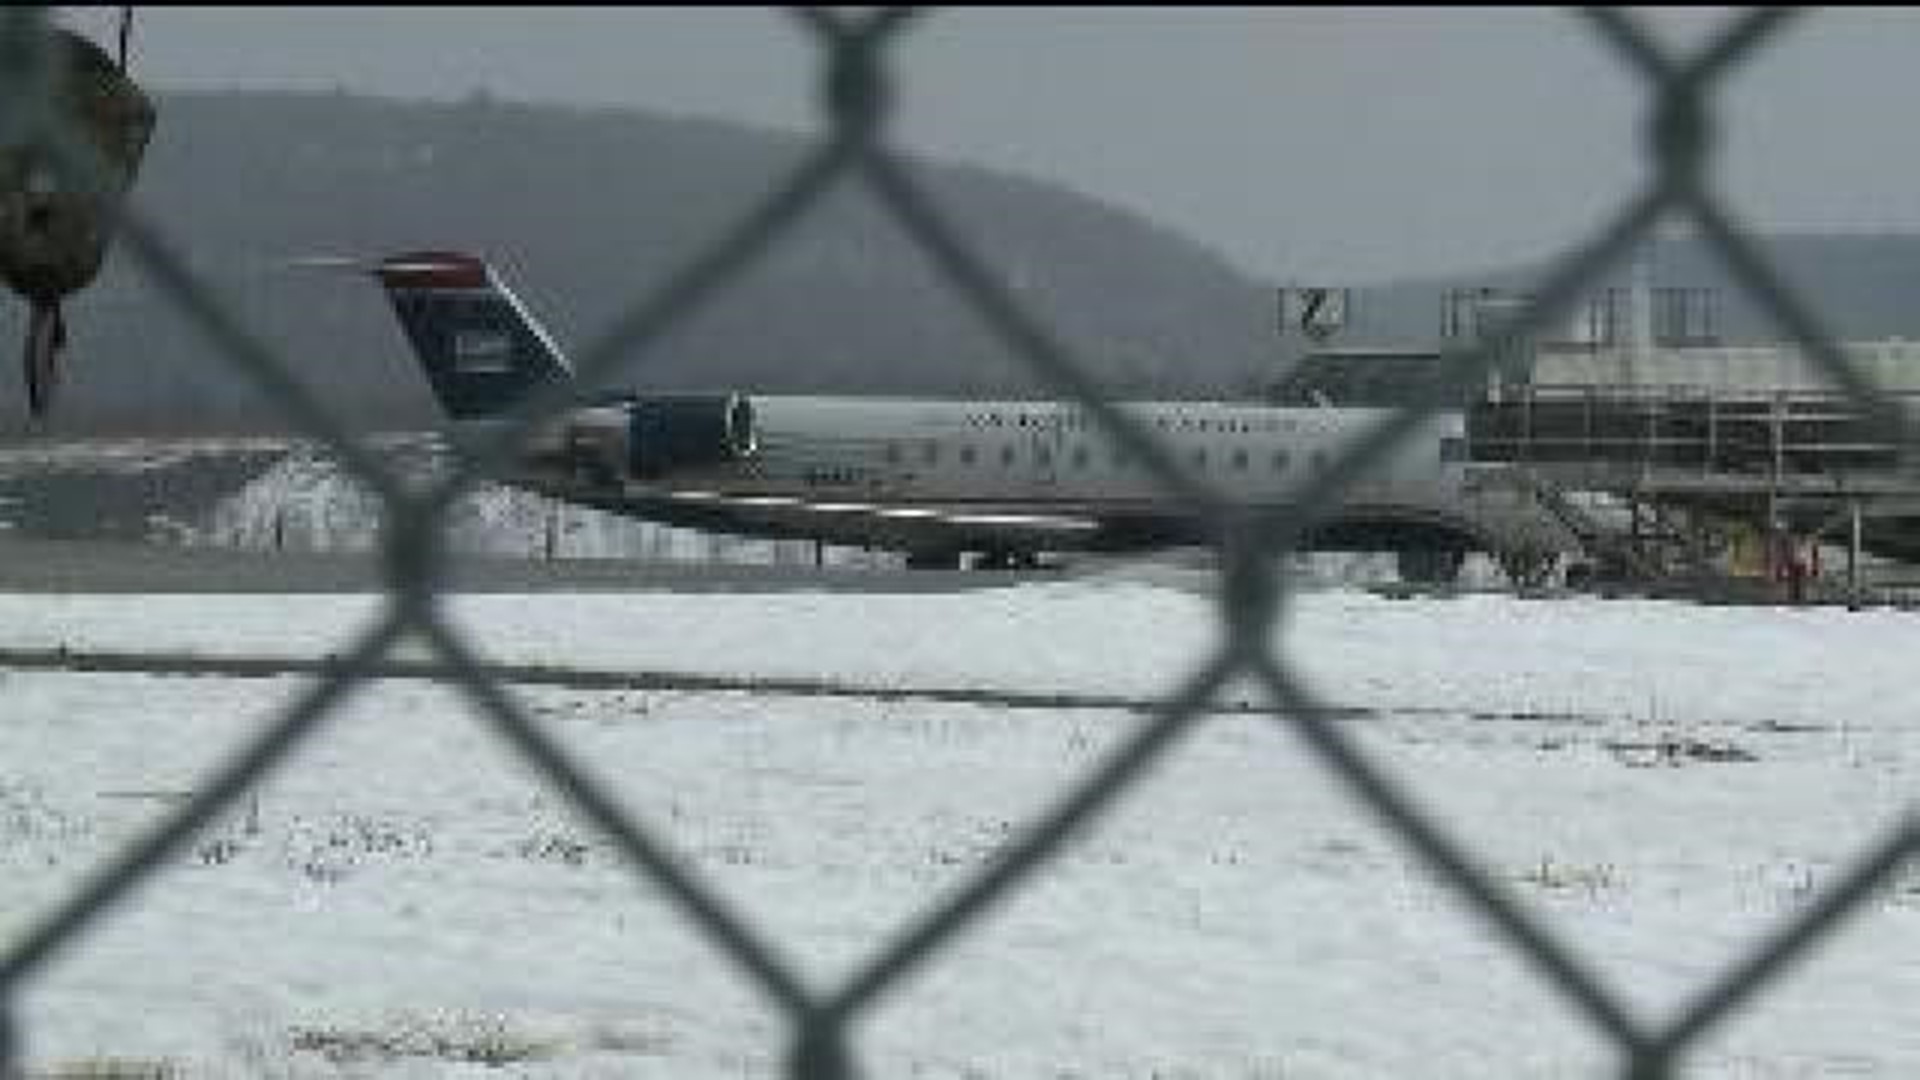 Diverted Jet Makes Emergency Landing at Airport